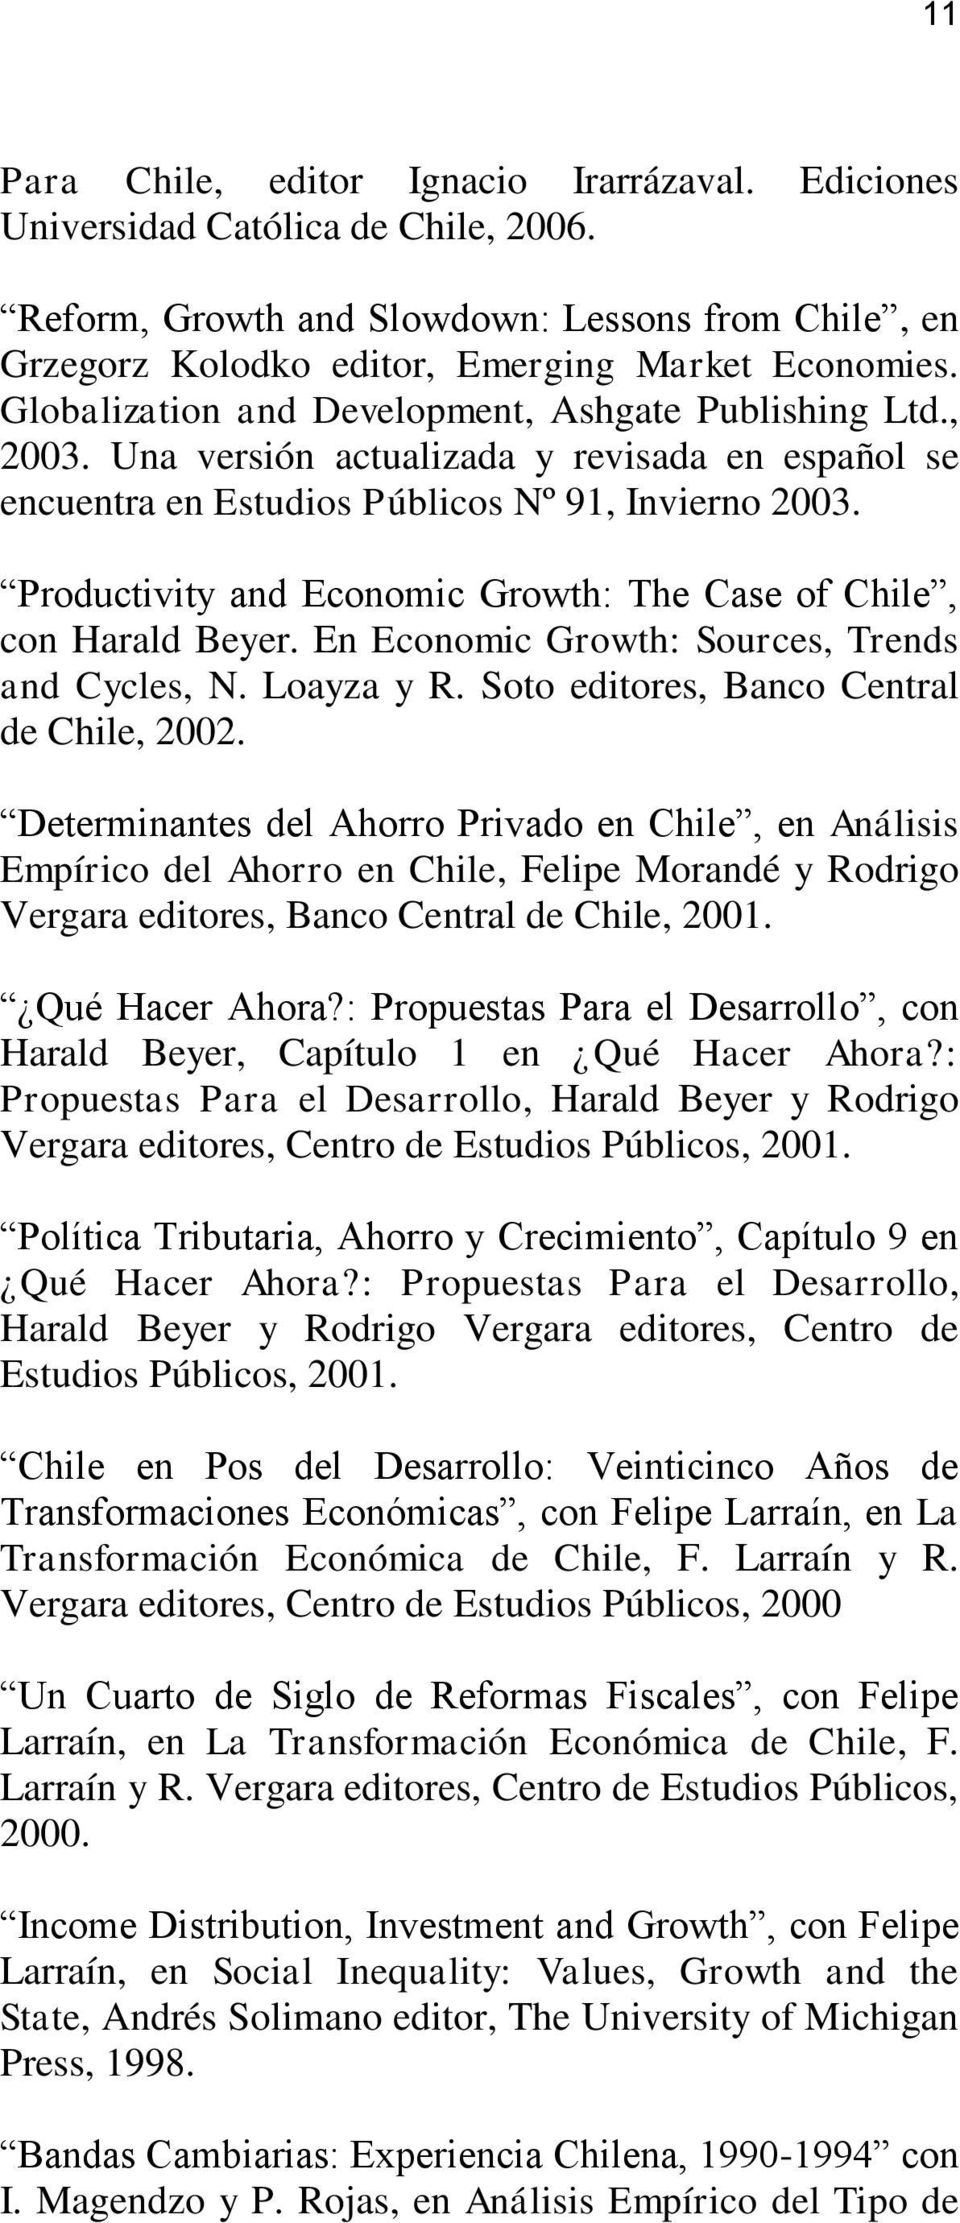 Productivity and Economic Growth: The Case of Chile, con Harald Beyer. En Economic Growth: Sources, Trends and Cycles, N. Loayza y R. Soto editores, Banco Central de Chile, 2002.